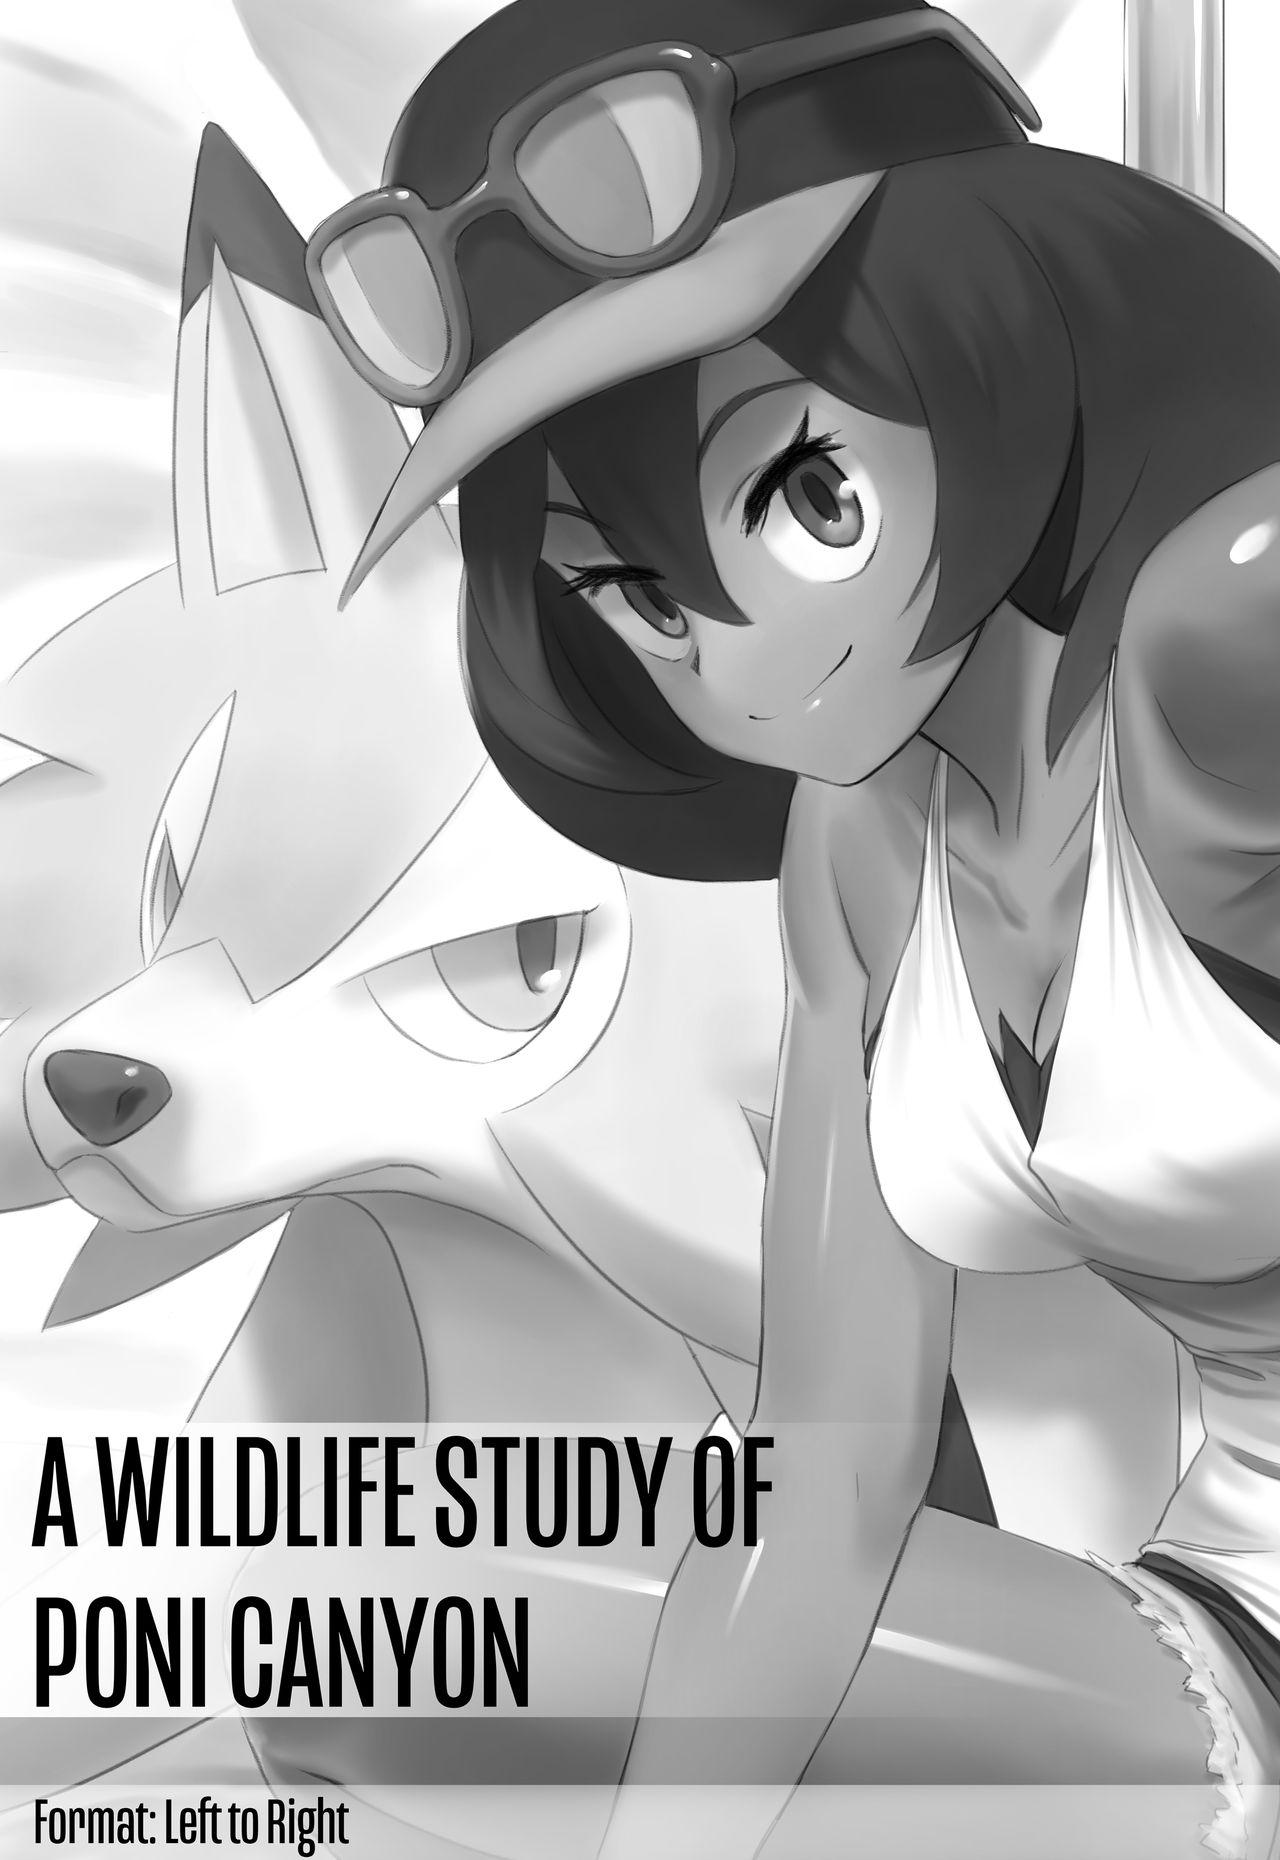 Fisting A Wildlife Study of Poni Canyon - Pokemon | pocket monsters Bj - Picture 1